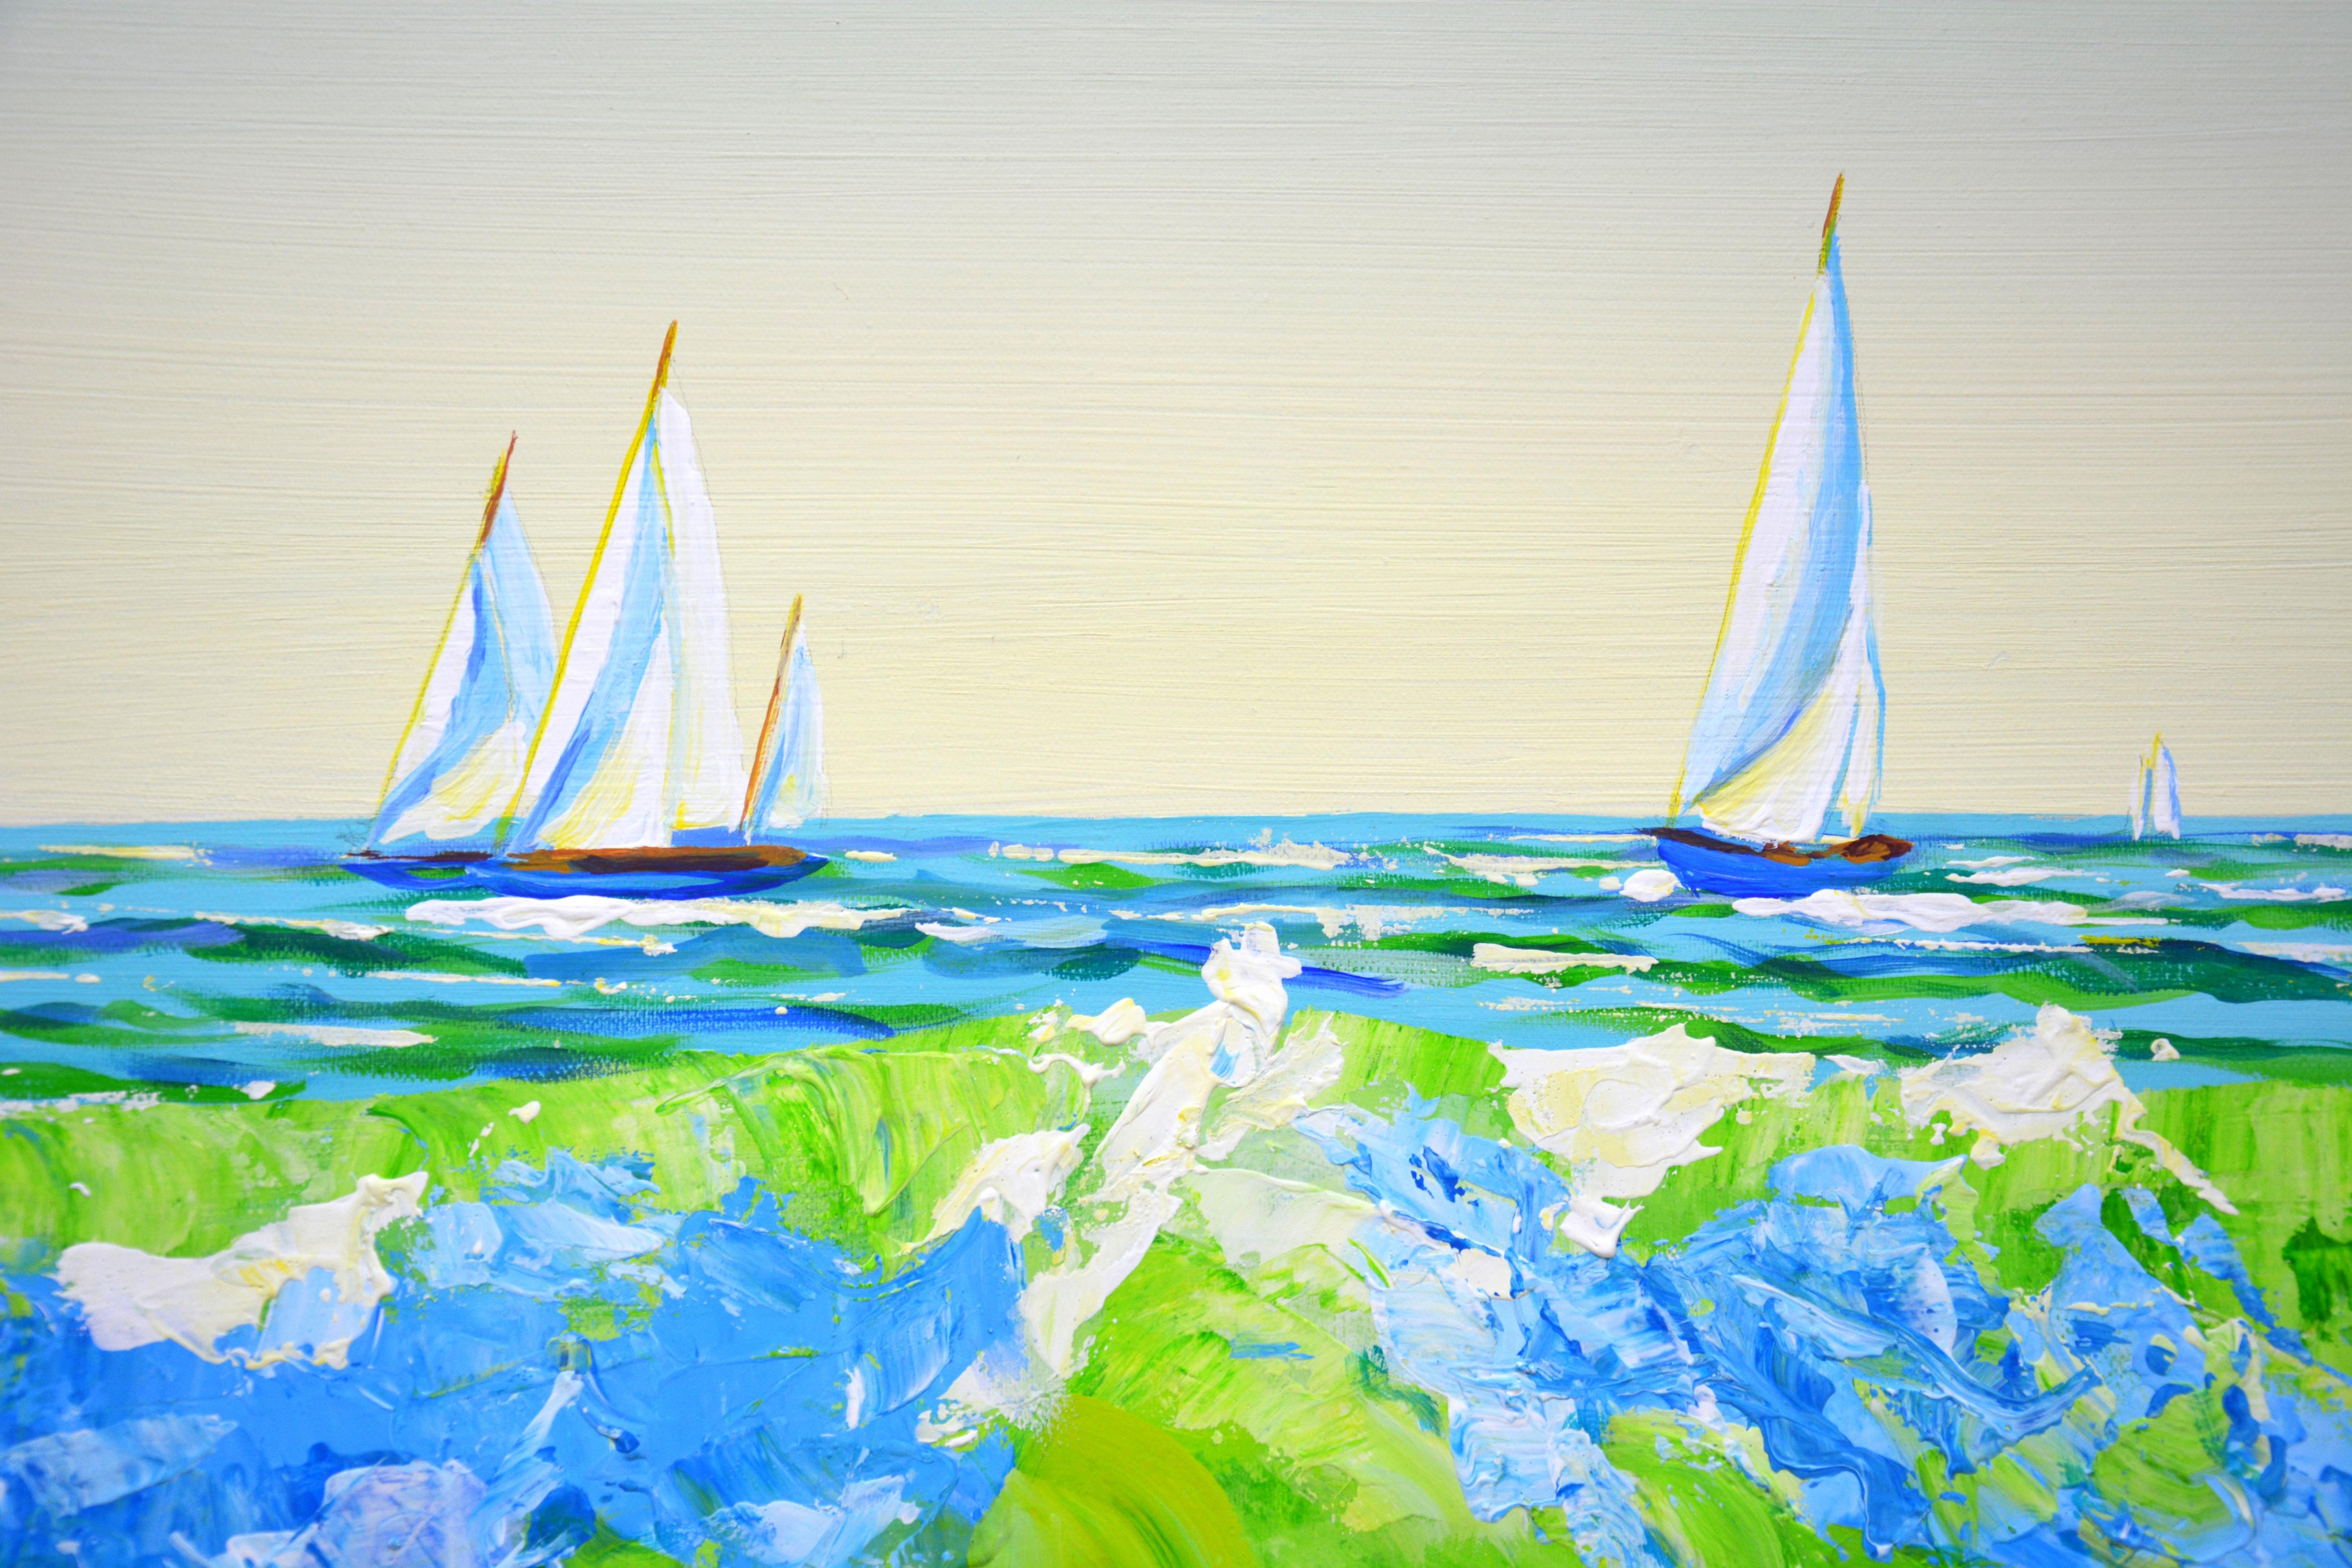 Ocean Waves. Sailboats 3. The work is written with inspiration, positively. Nature: seascape, clear sky over the ocean, light reflected by oncoming waves, sun glare on the water, sea foam, sailboats on the water create an atmosphere of relaxation. A